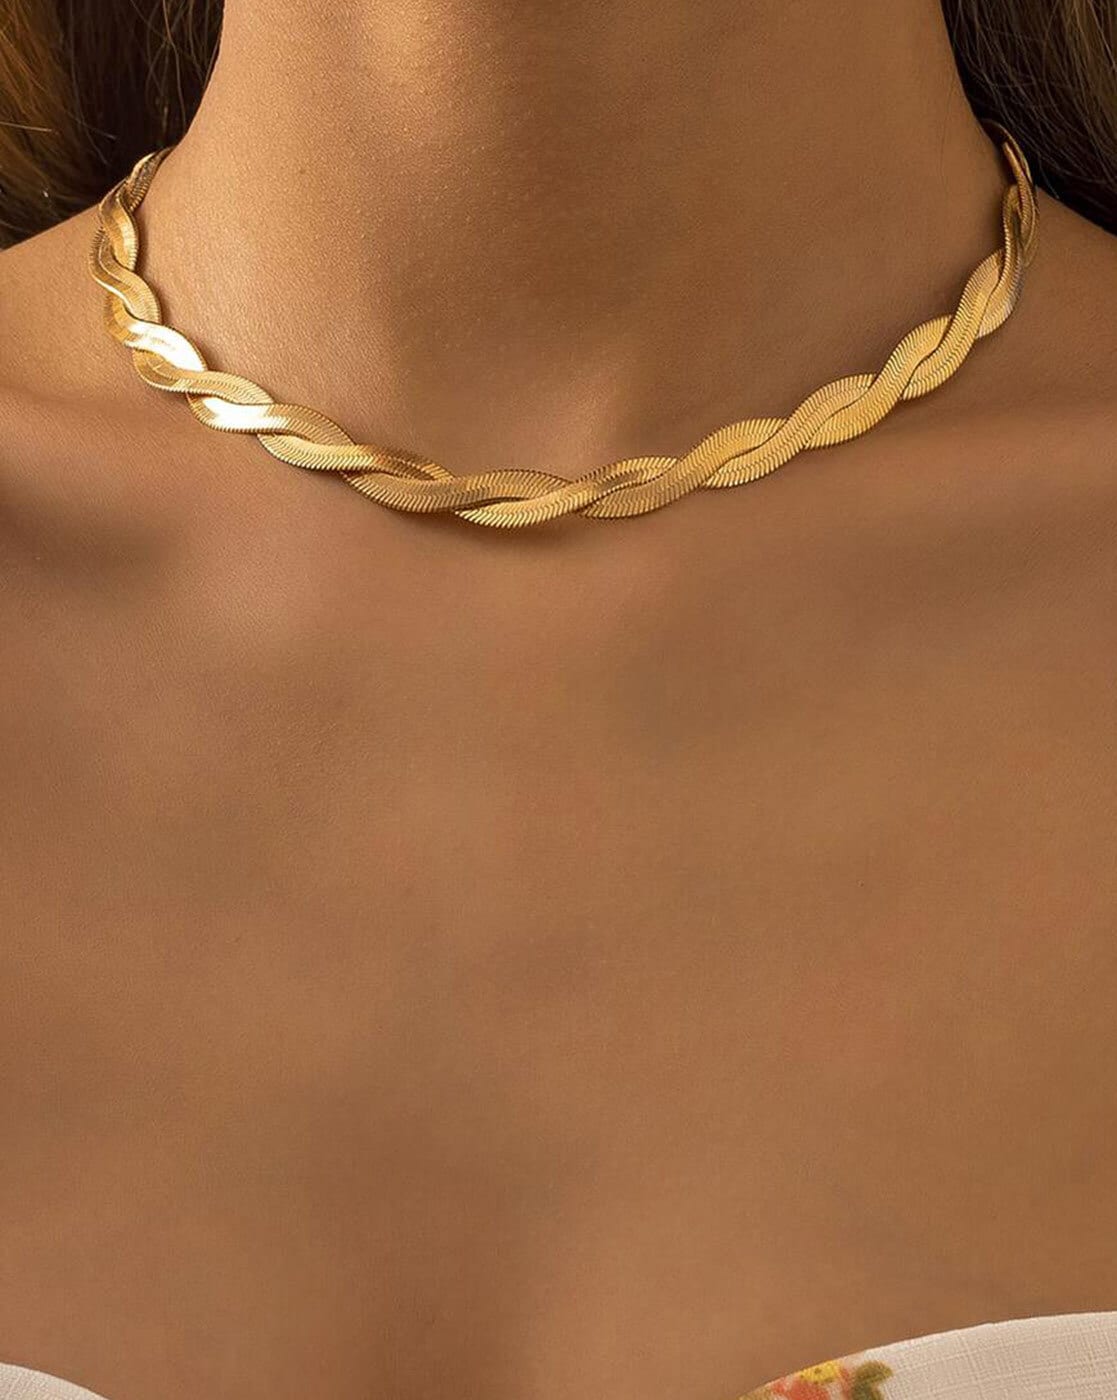 Buy Long Gold Snake Necklace, Bendable Serpent Necklace, Flexible Reptile  Necklace, Snake Jewelry Online in India - Etsy